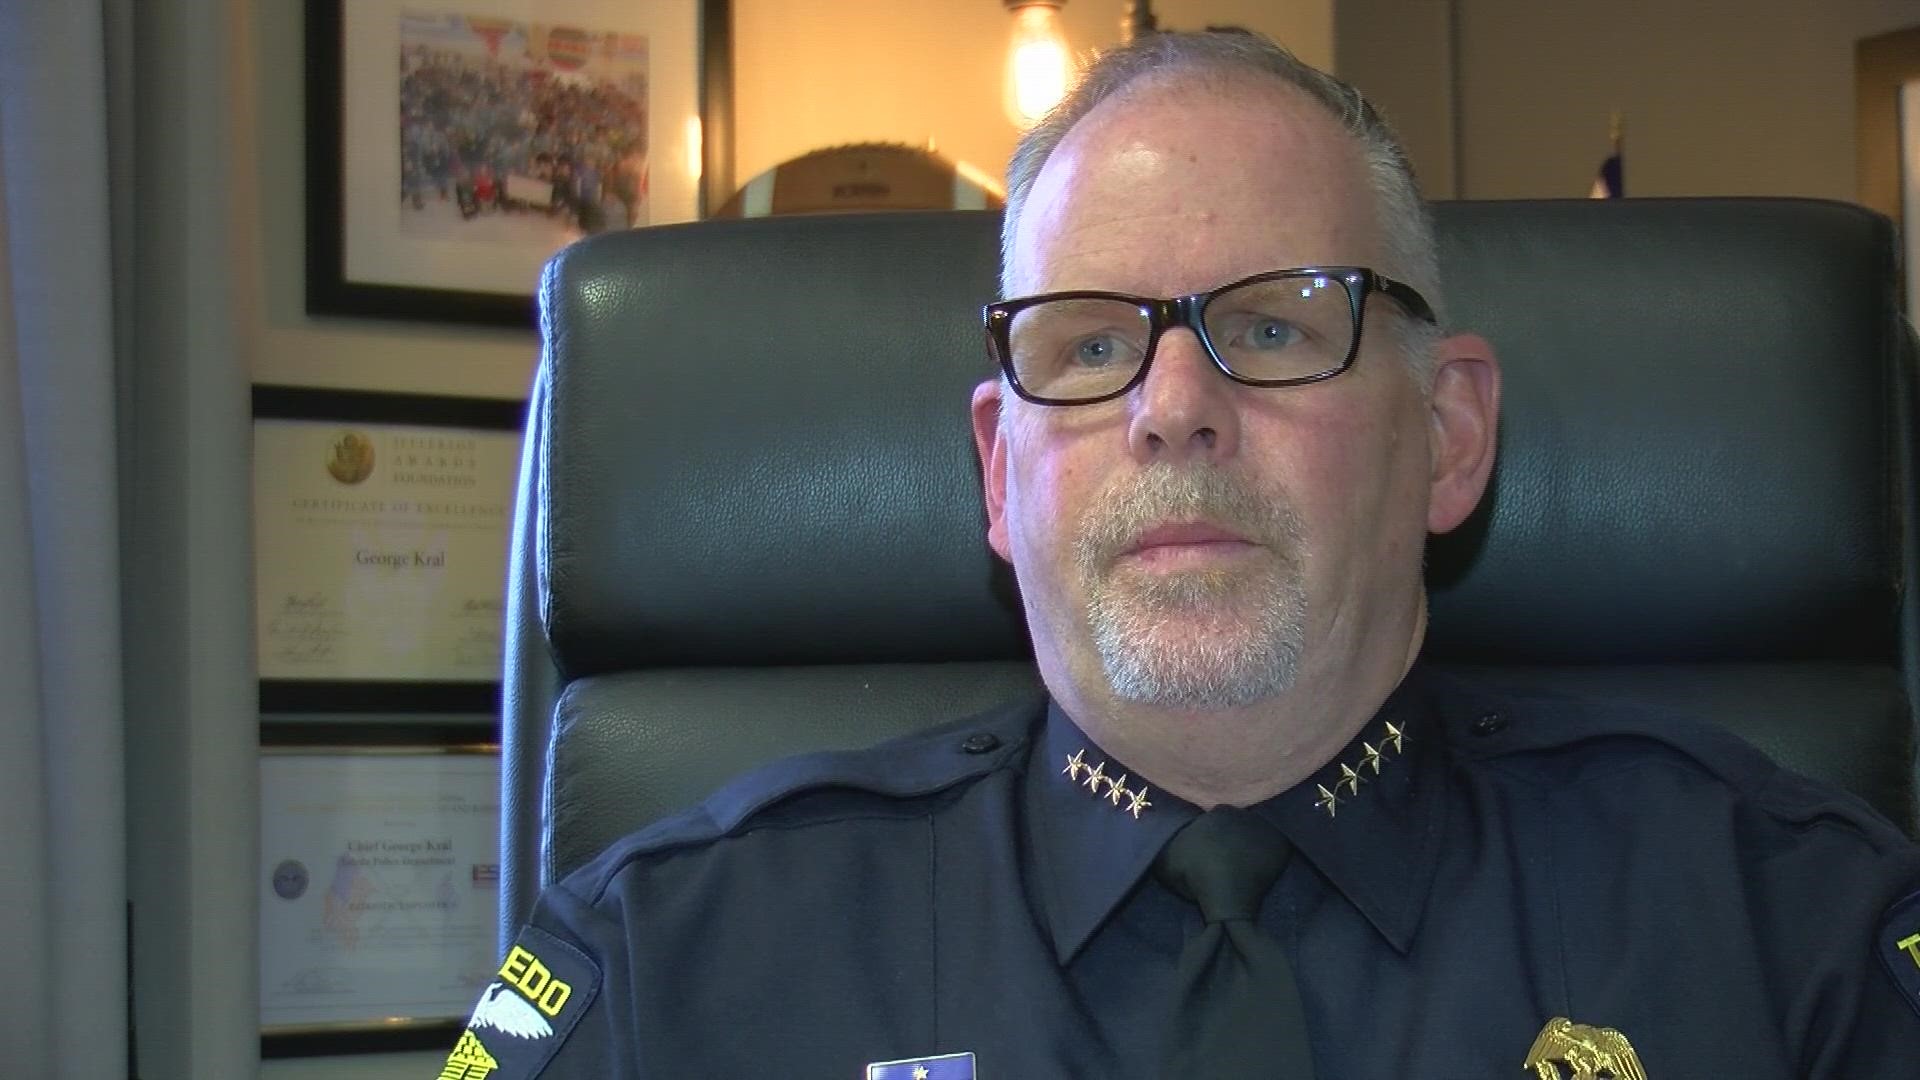 WTOL 11 sits down for an exclusive interview with Toledo Police Chief George Kral on violence in the city, issues the department is facing and if there's a solution.